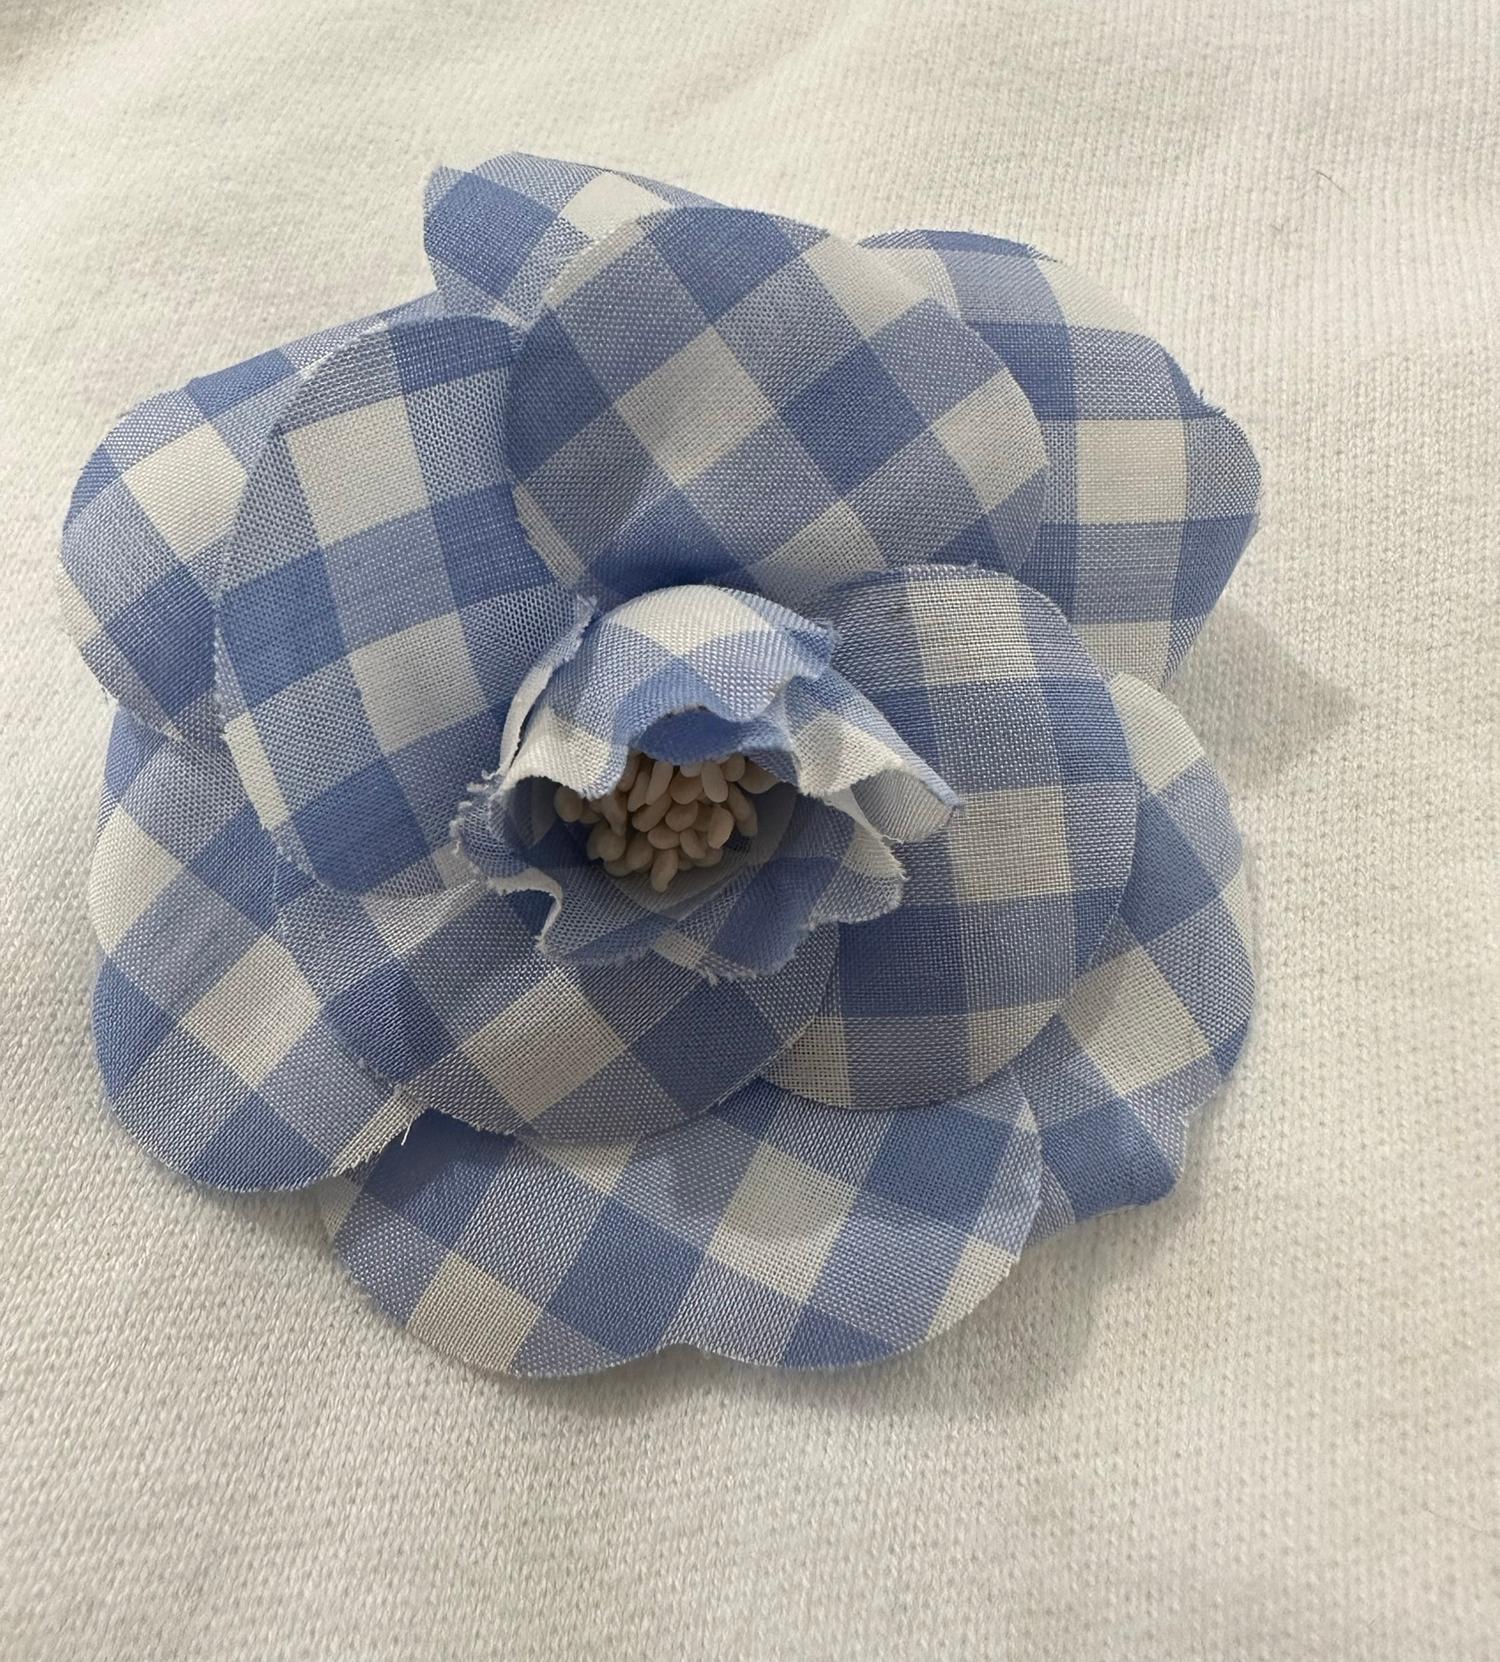 Chanel Rare to Find S/S 1995 Blue & White Gingham Camellia Flower Pin   1